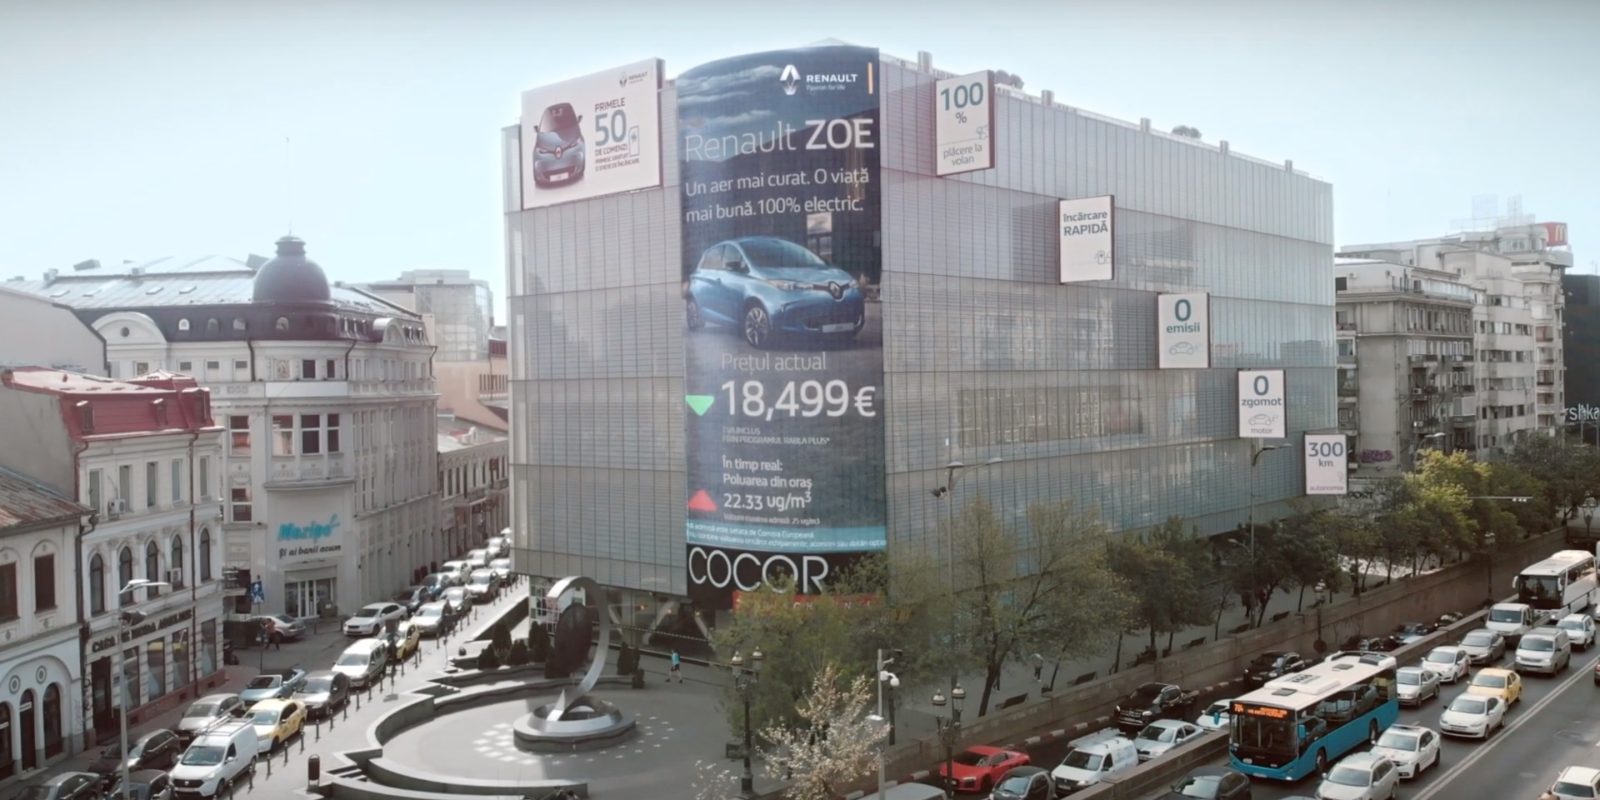 Renault billboard shows electric car prices drop when air pollution goes up